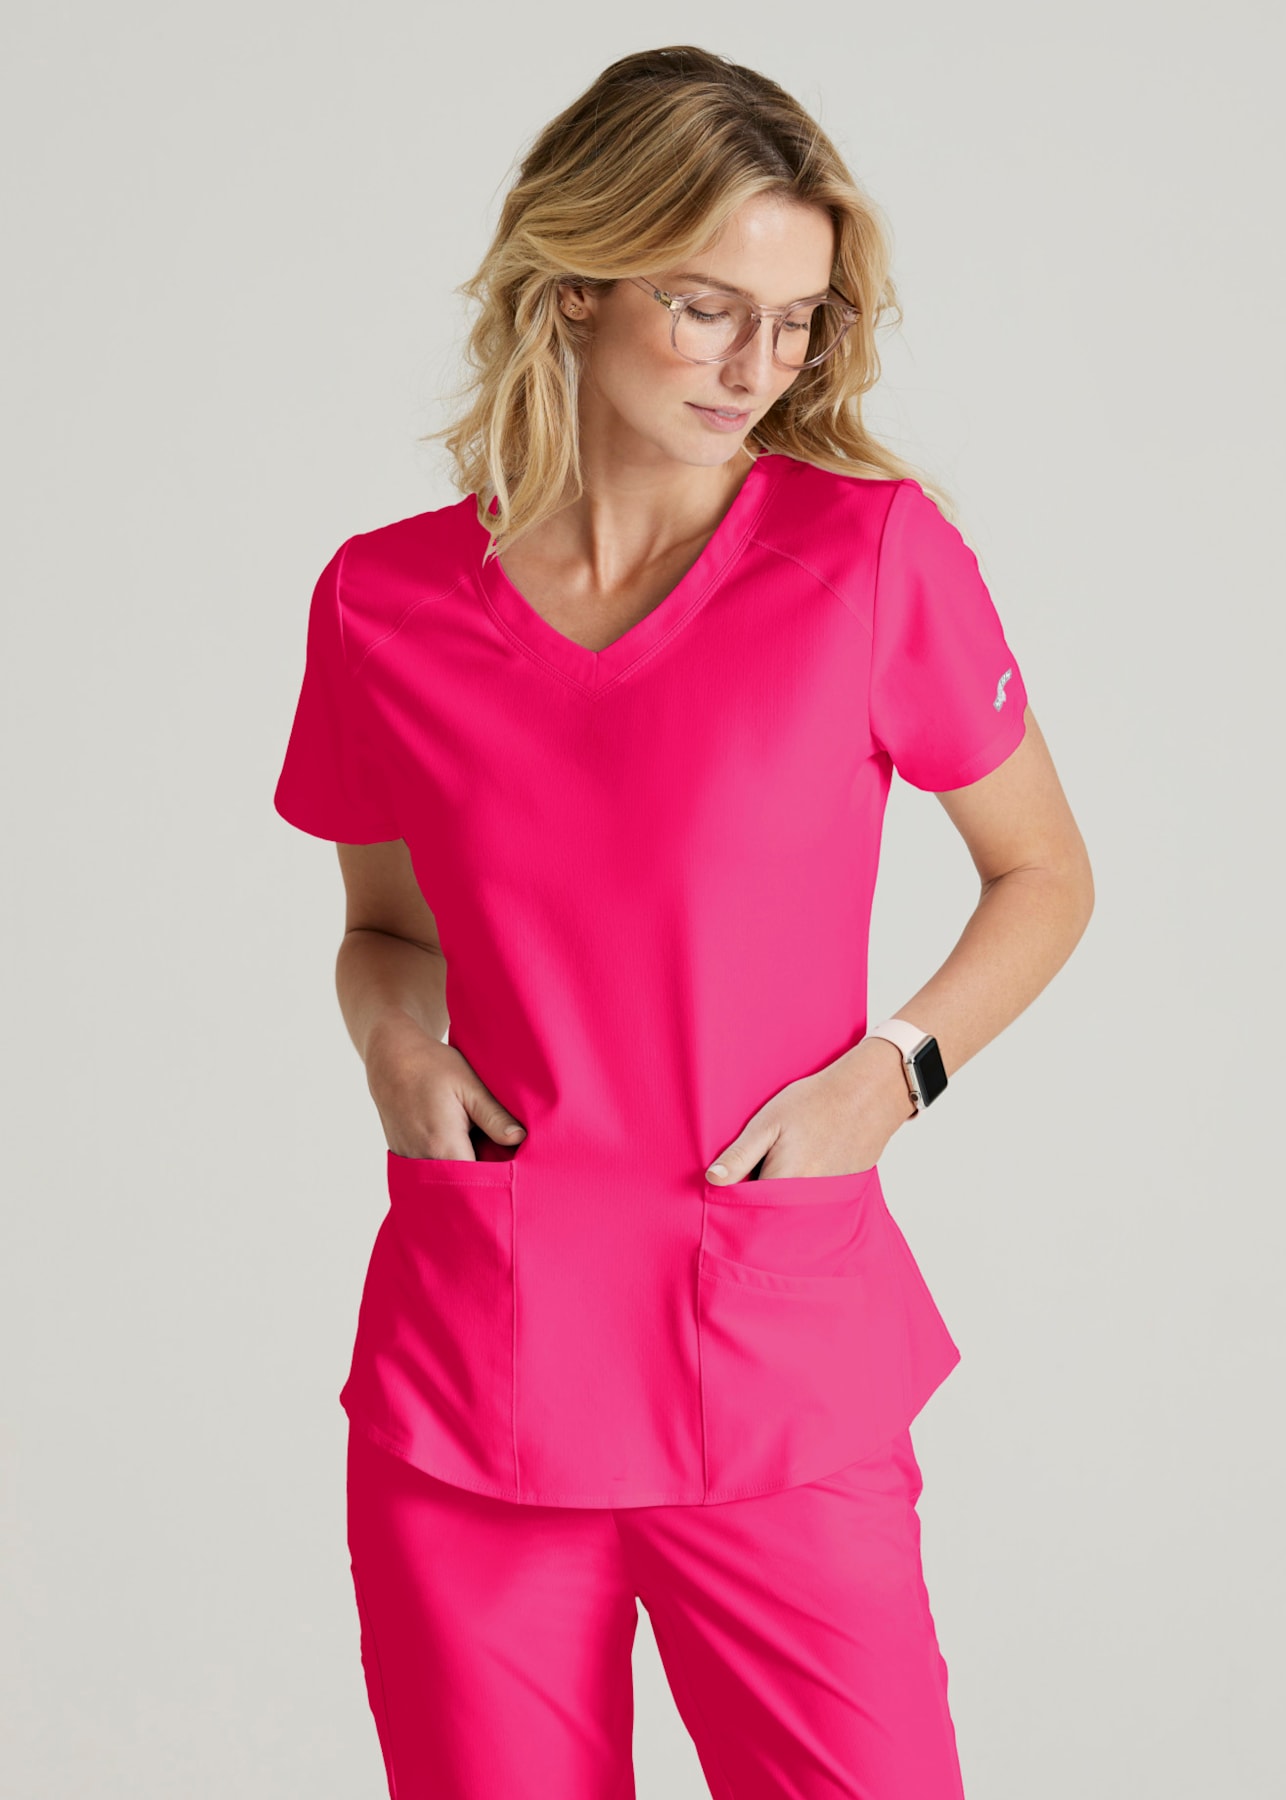 BARCO Skechers Vitality Charge Scrub Top for Women - V-Neck